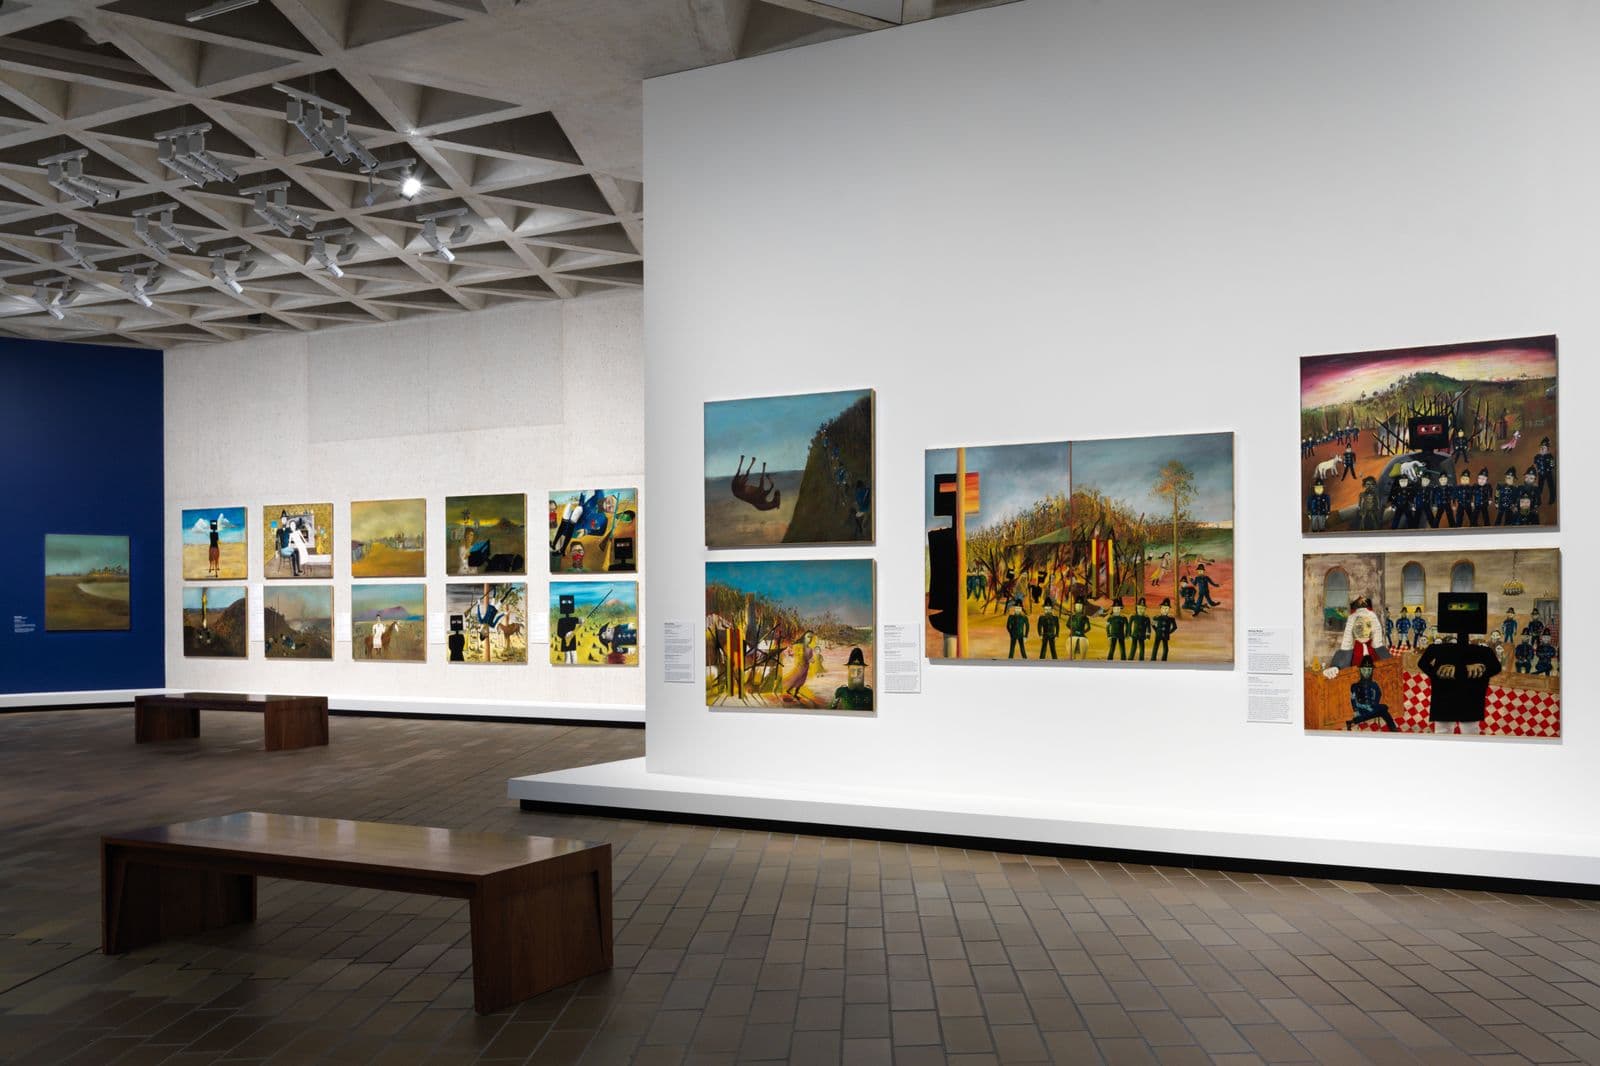 Paintings of Ned Kelly by the artist Sidney nolan hang on the brutalist architecture of the National Gallery of Australia.